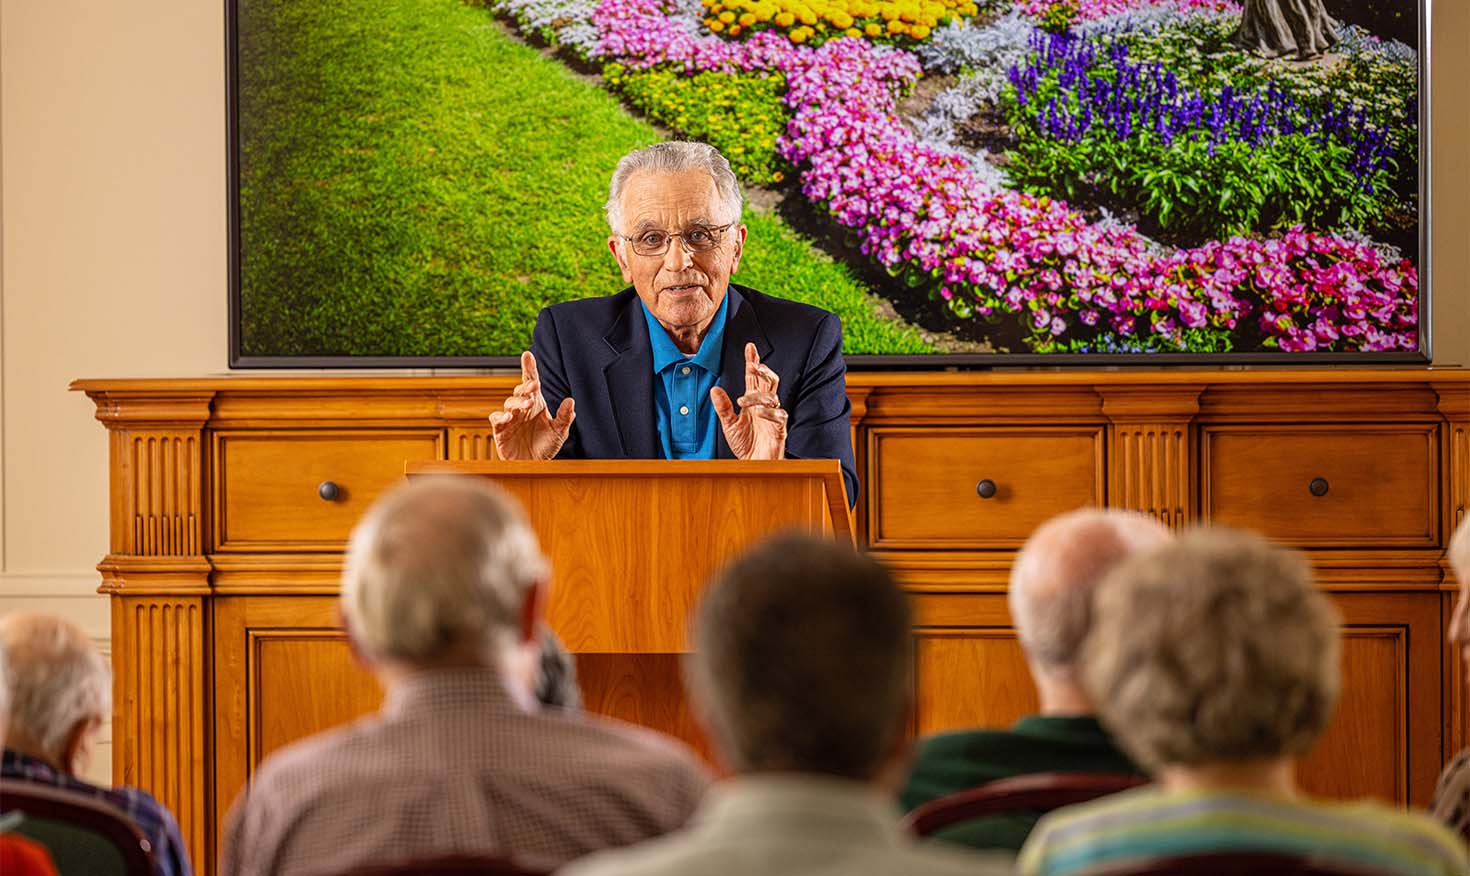 Senior man at a podium giving a lecture to a crowd of senior residents